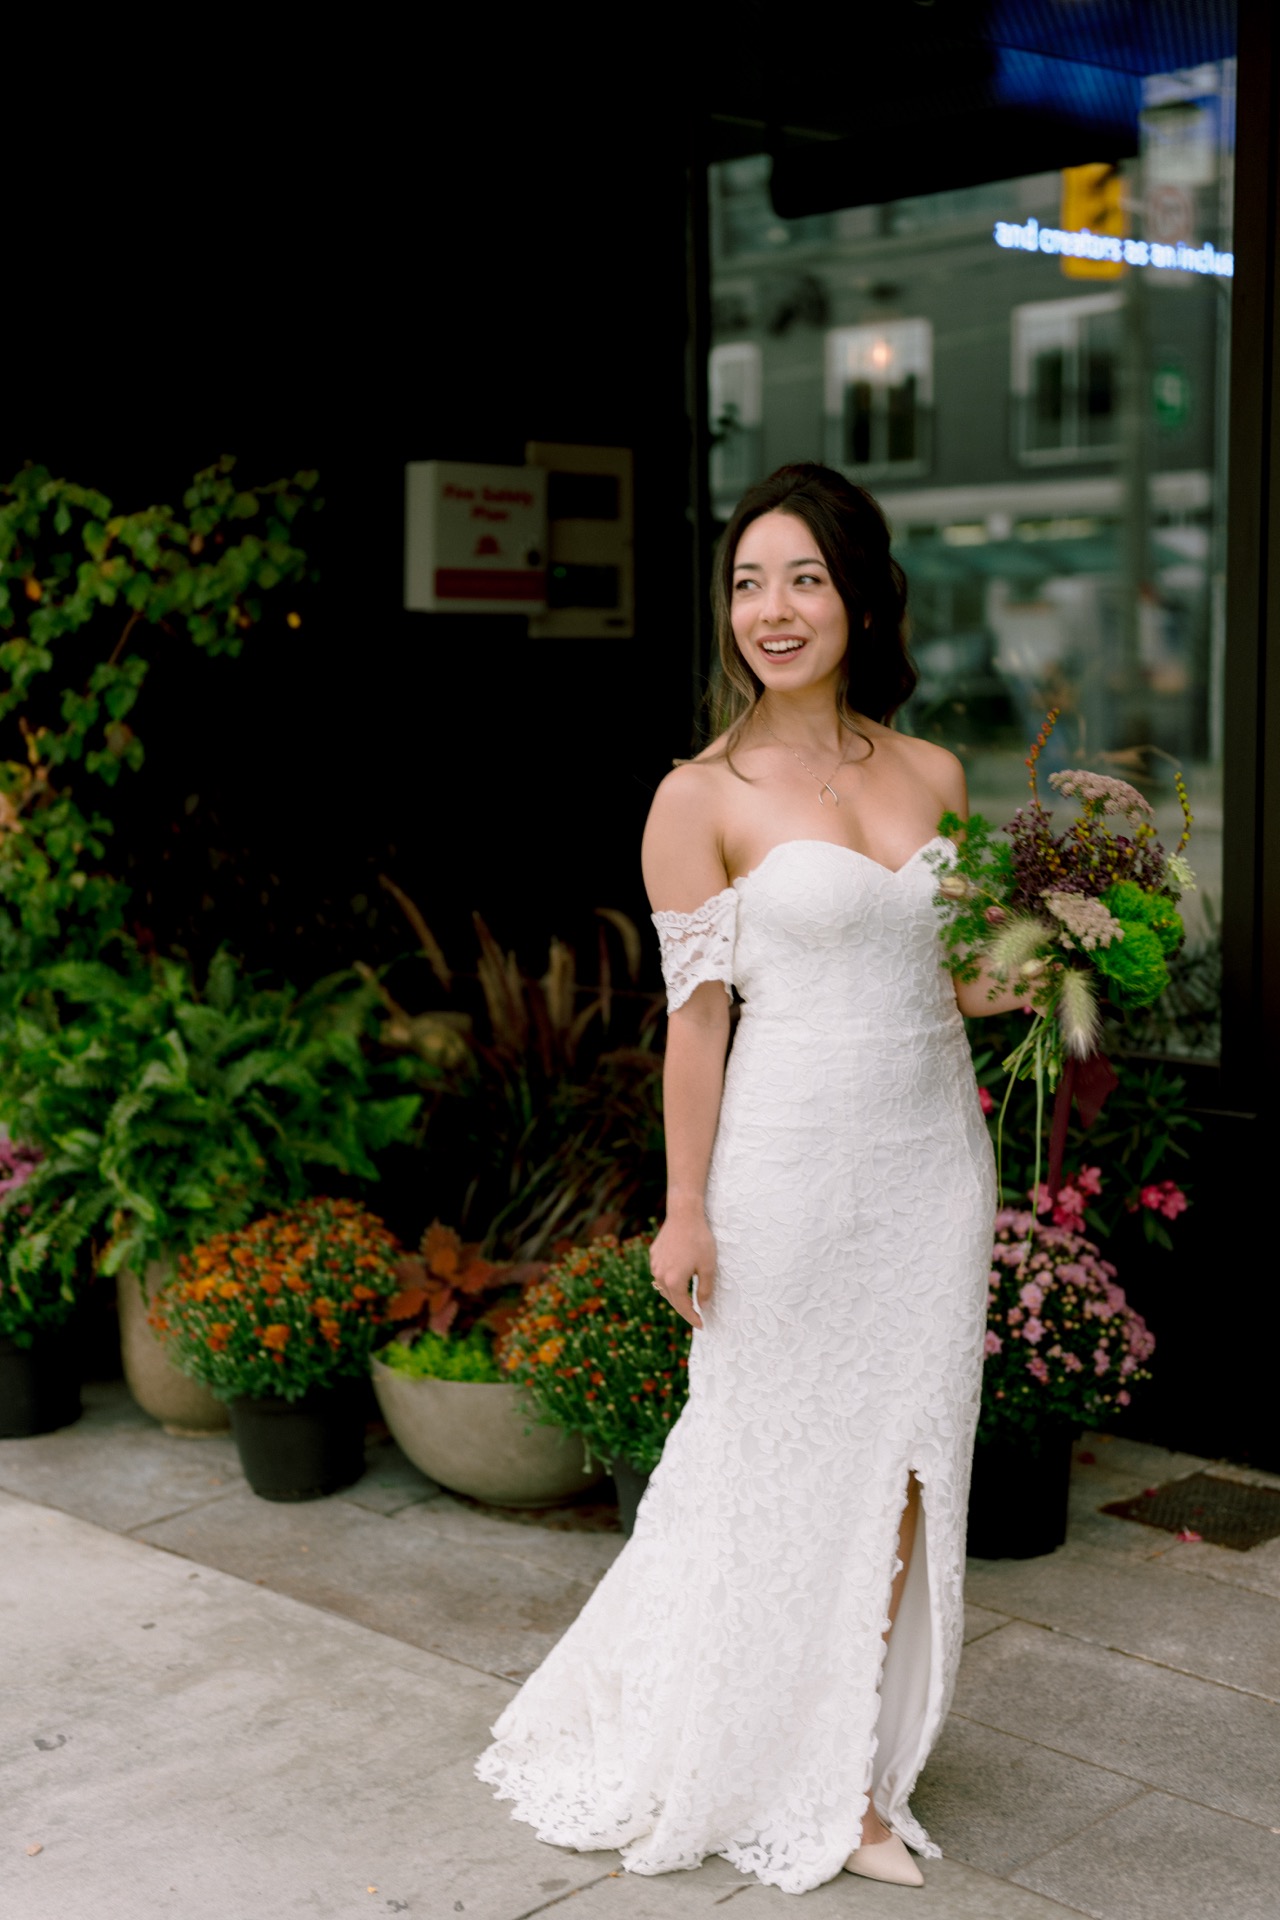 A bride in a white off-the-shoulder gown smiling and holding a bouquet on a city sidewalk.